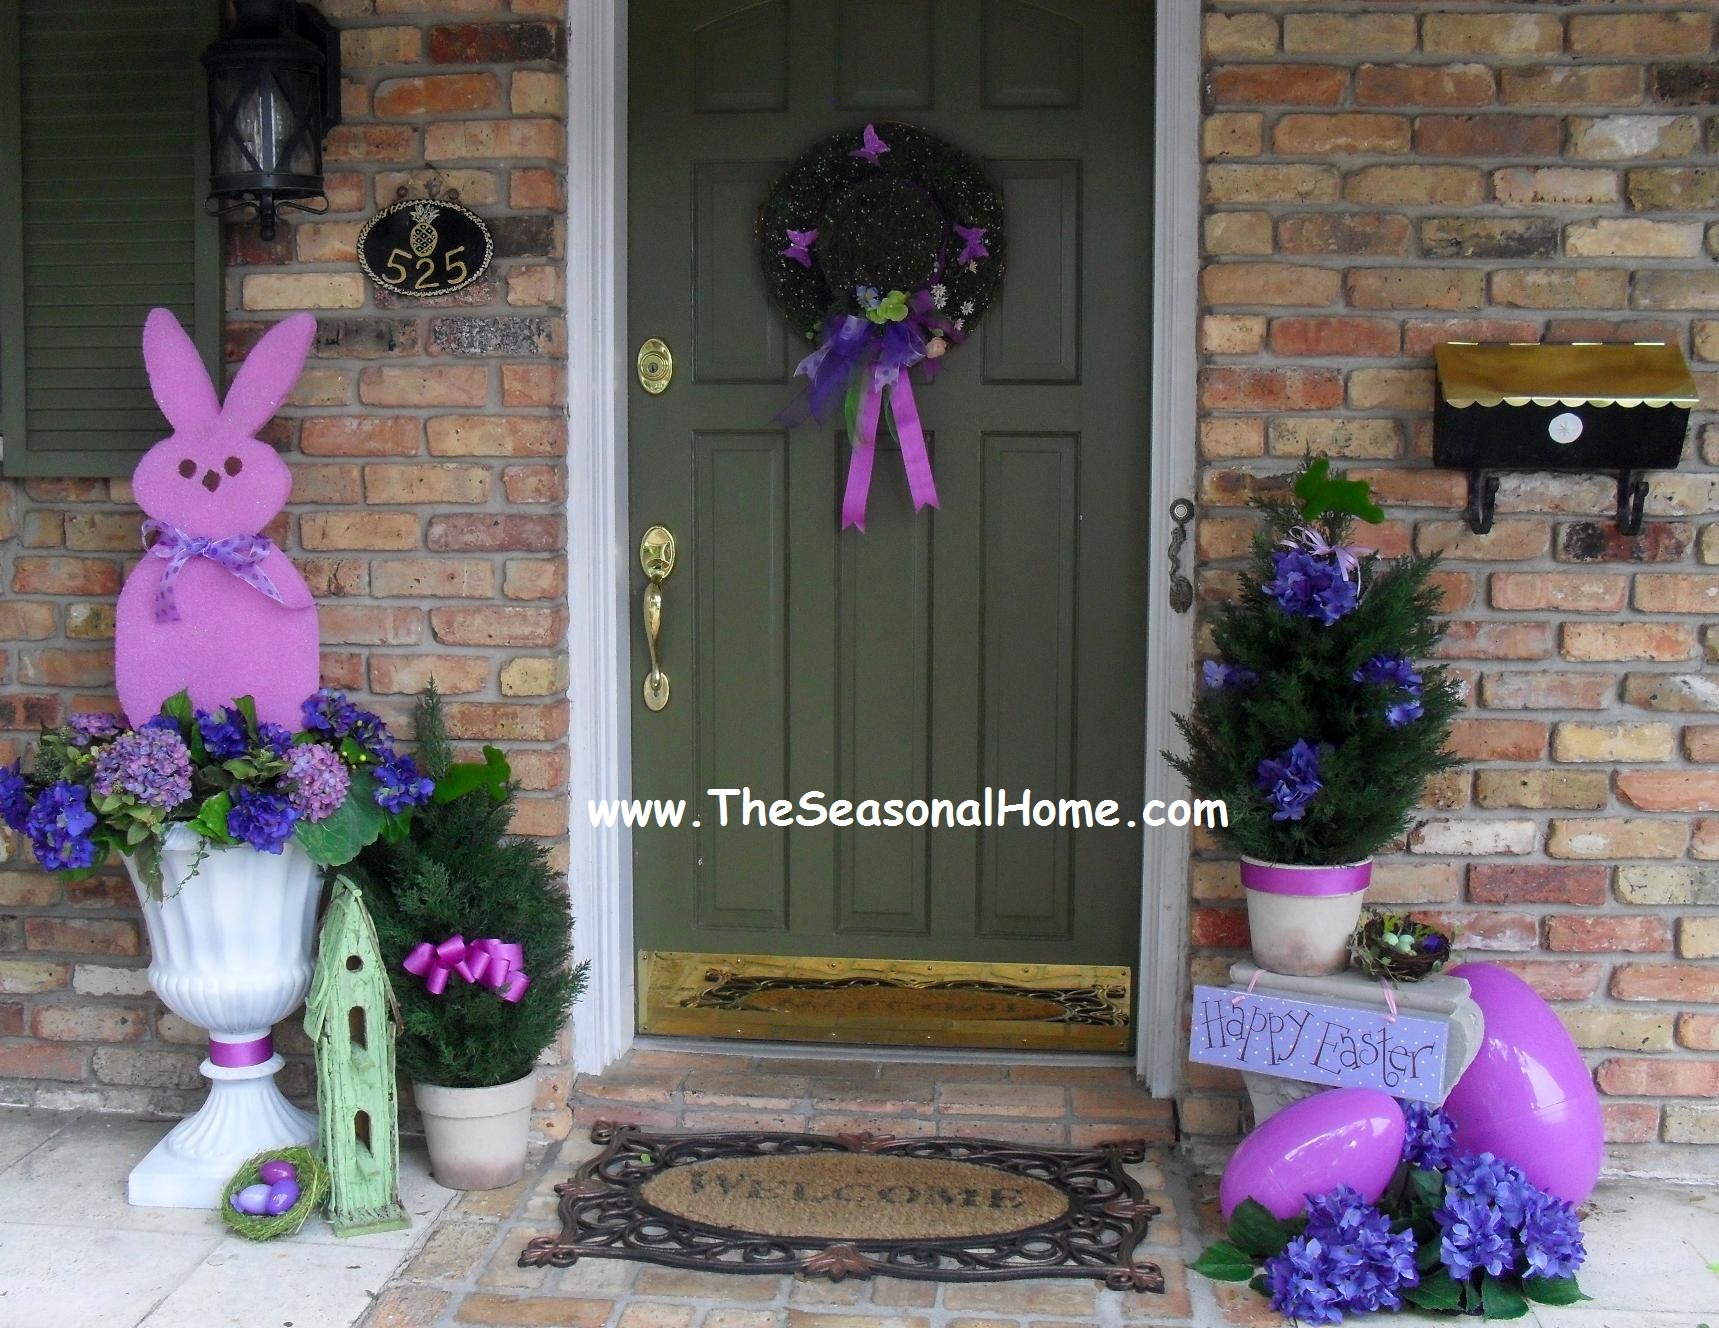 DIY Outdoor Easter Decorations: 15 Easy and Affordable Ideas